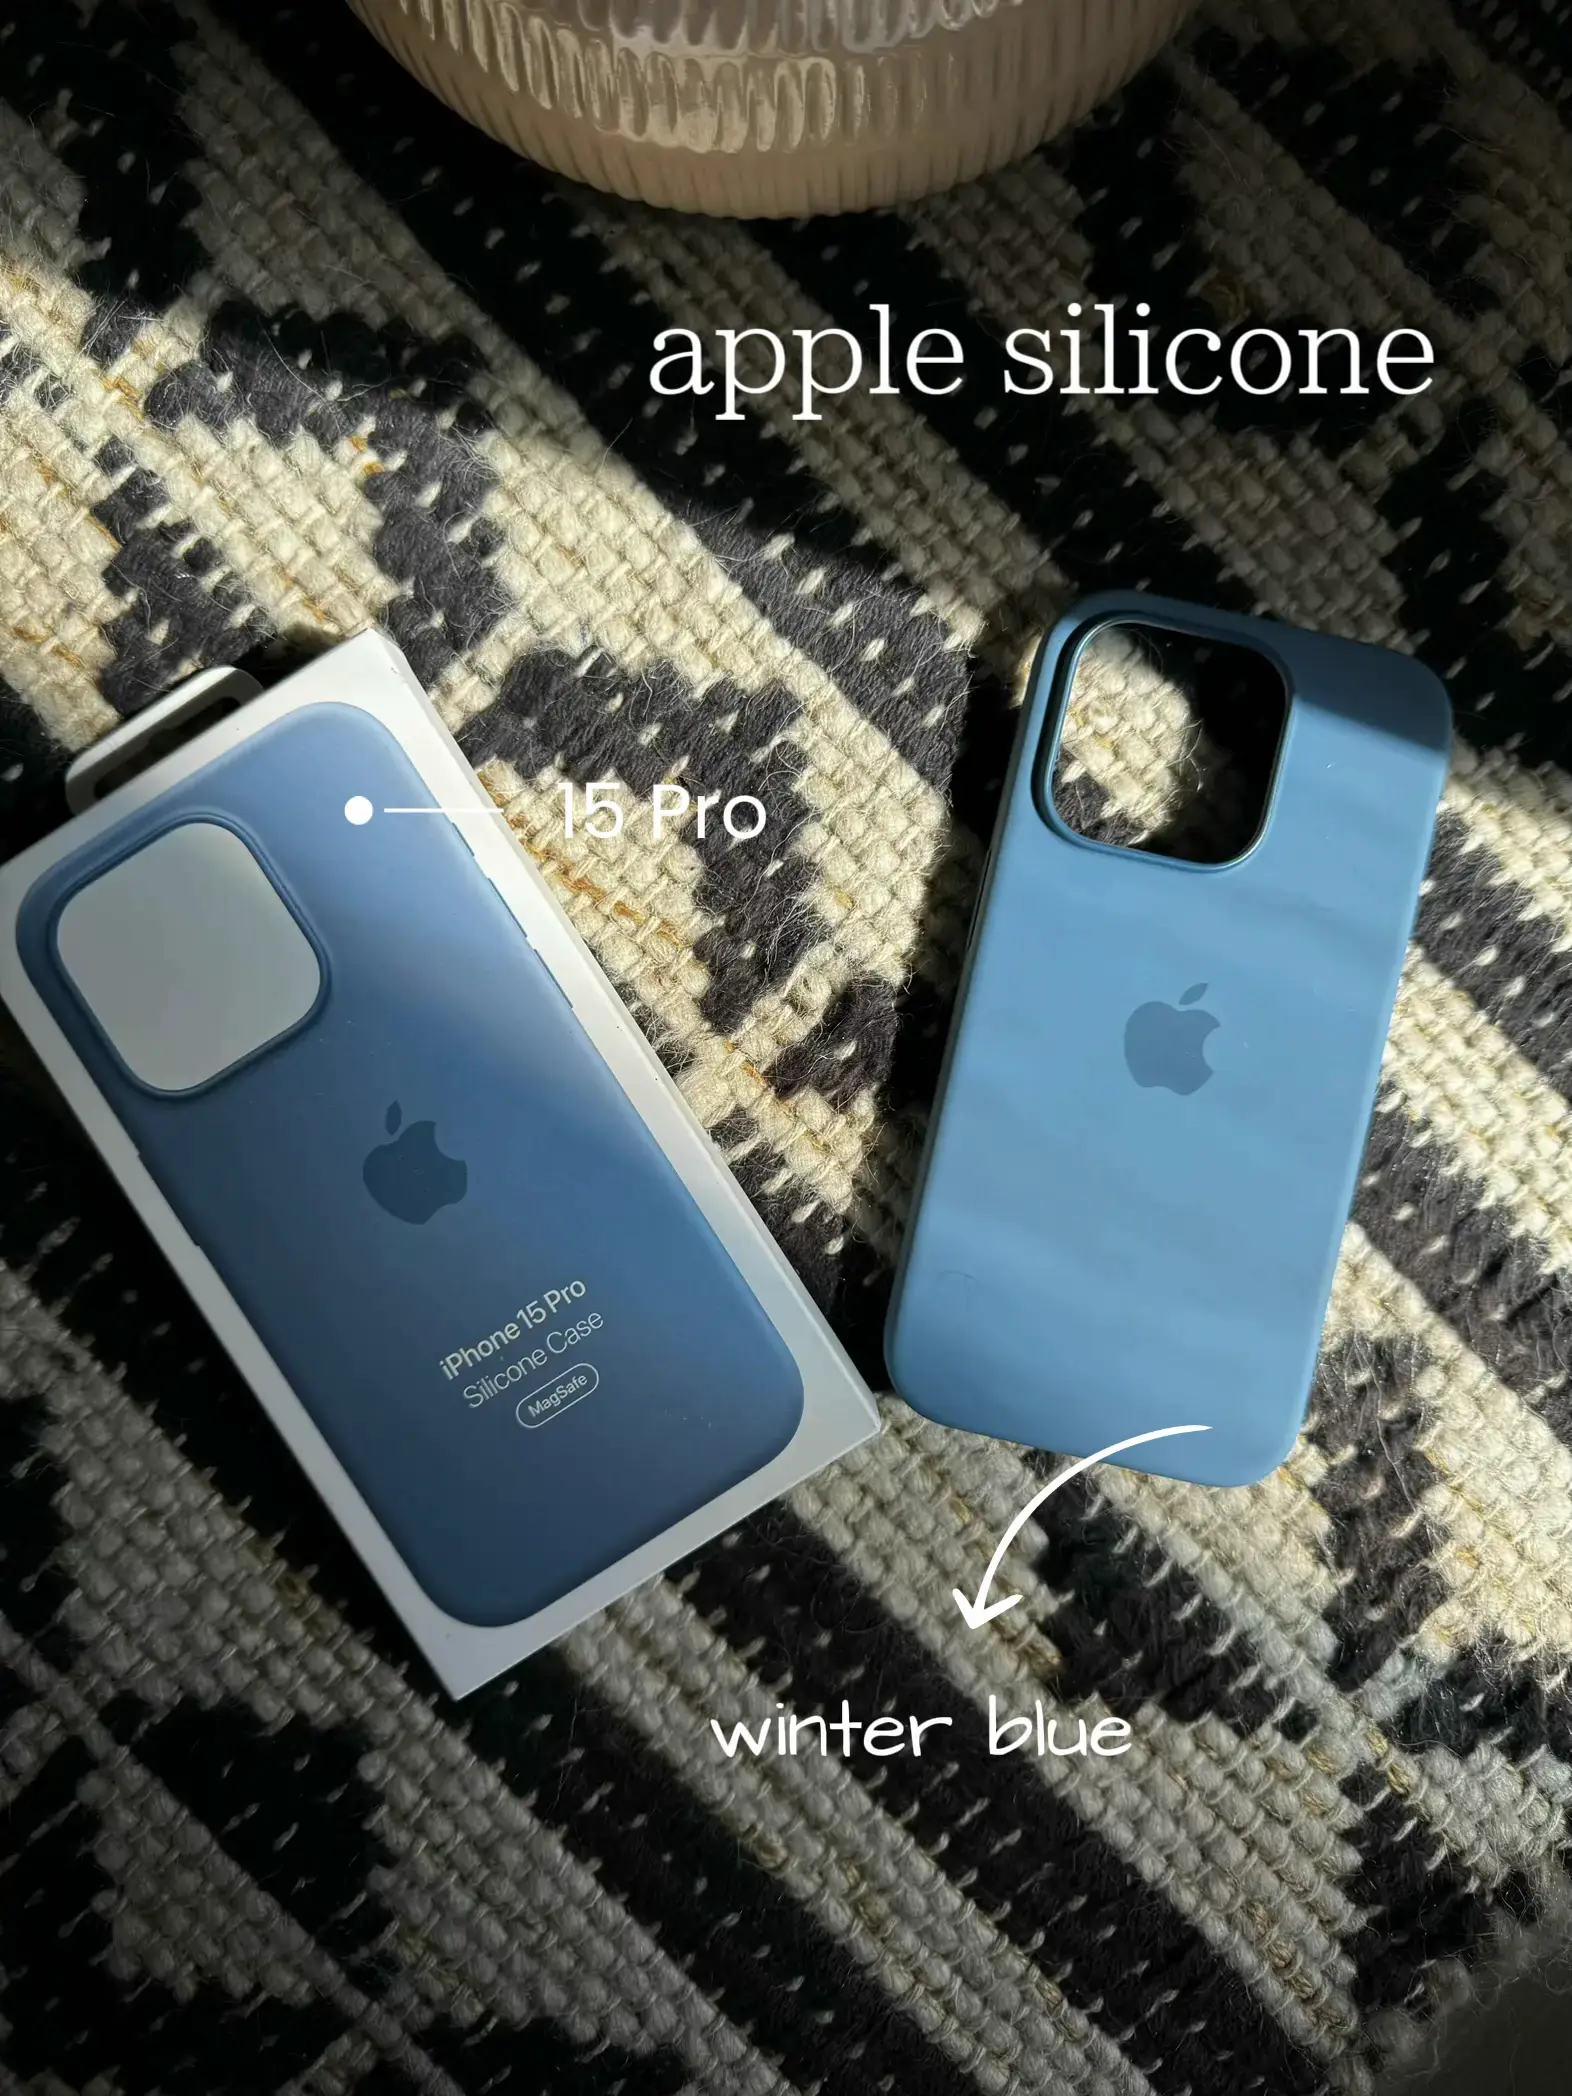 apple silicone - winter blue, Gallery posted by aceliacin